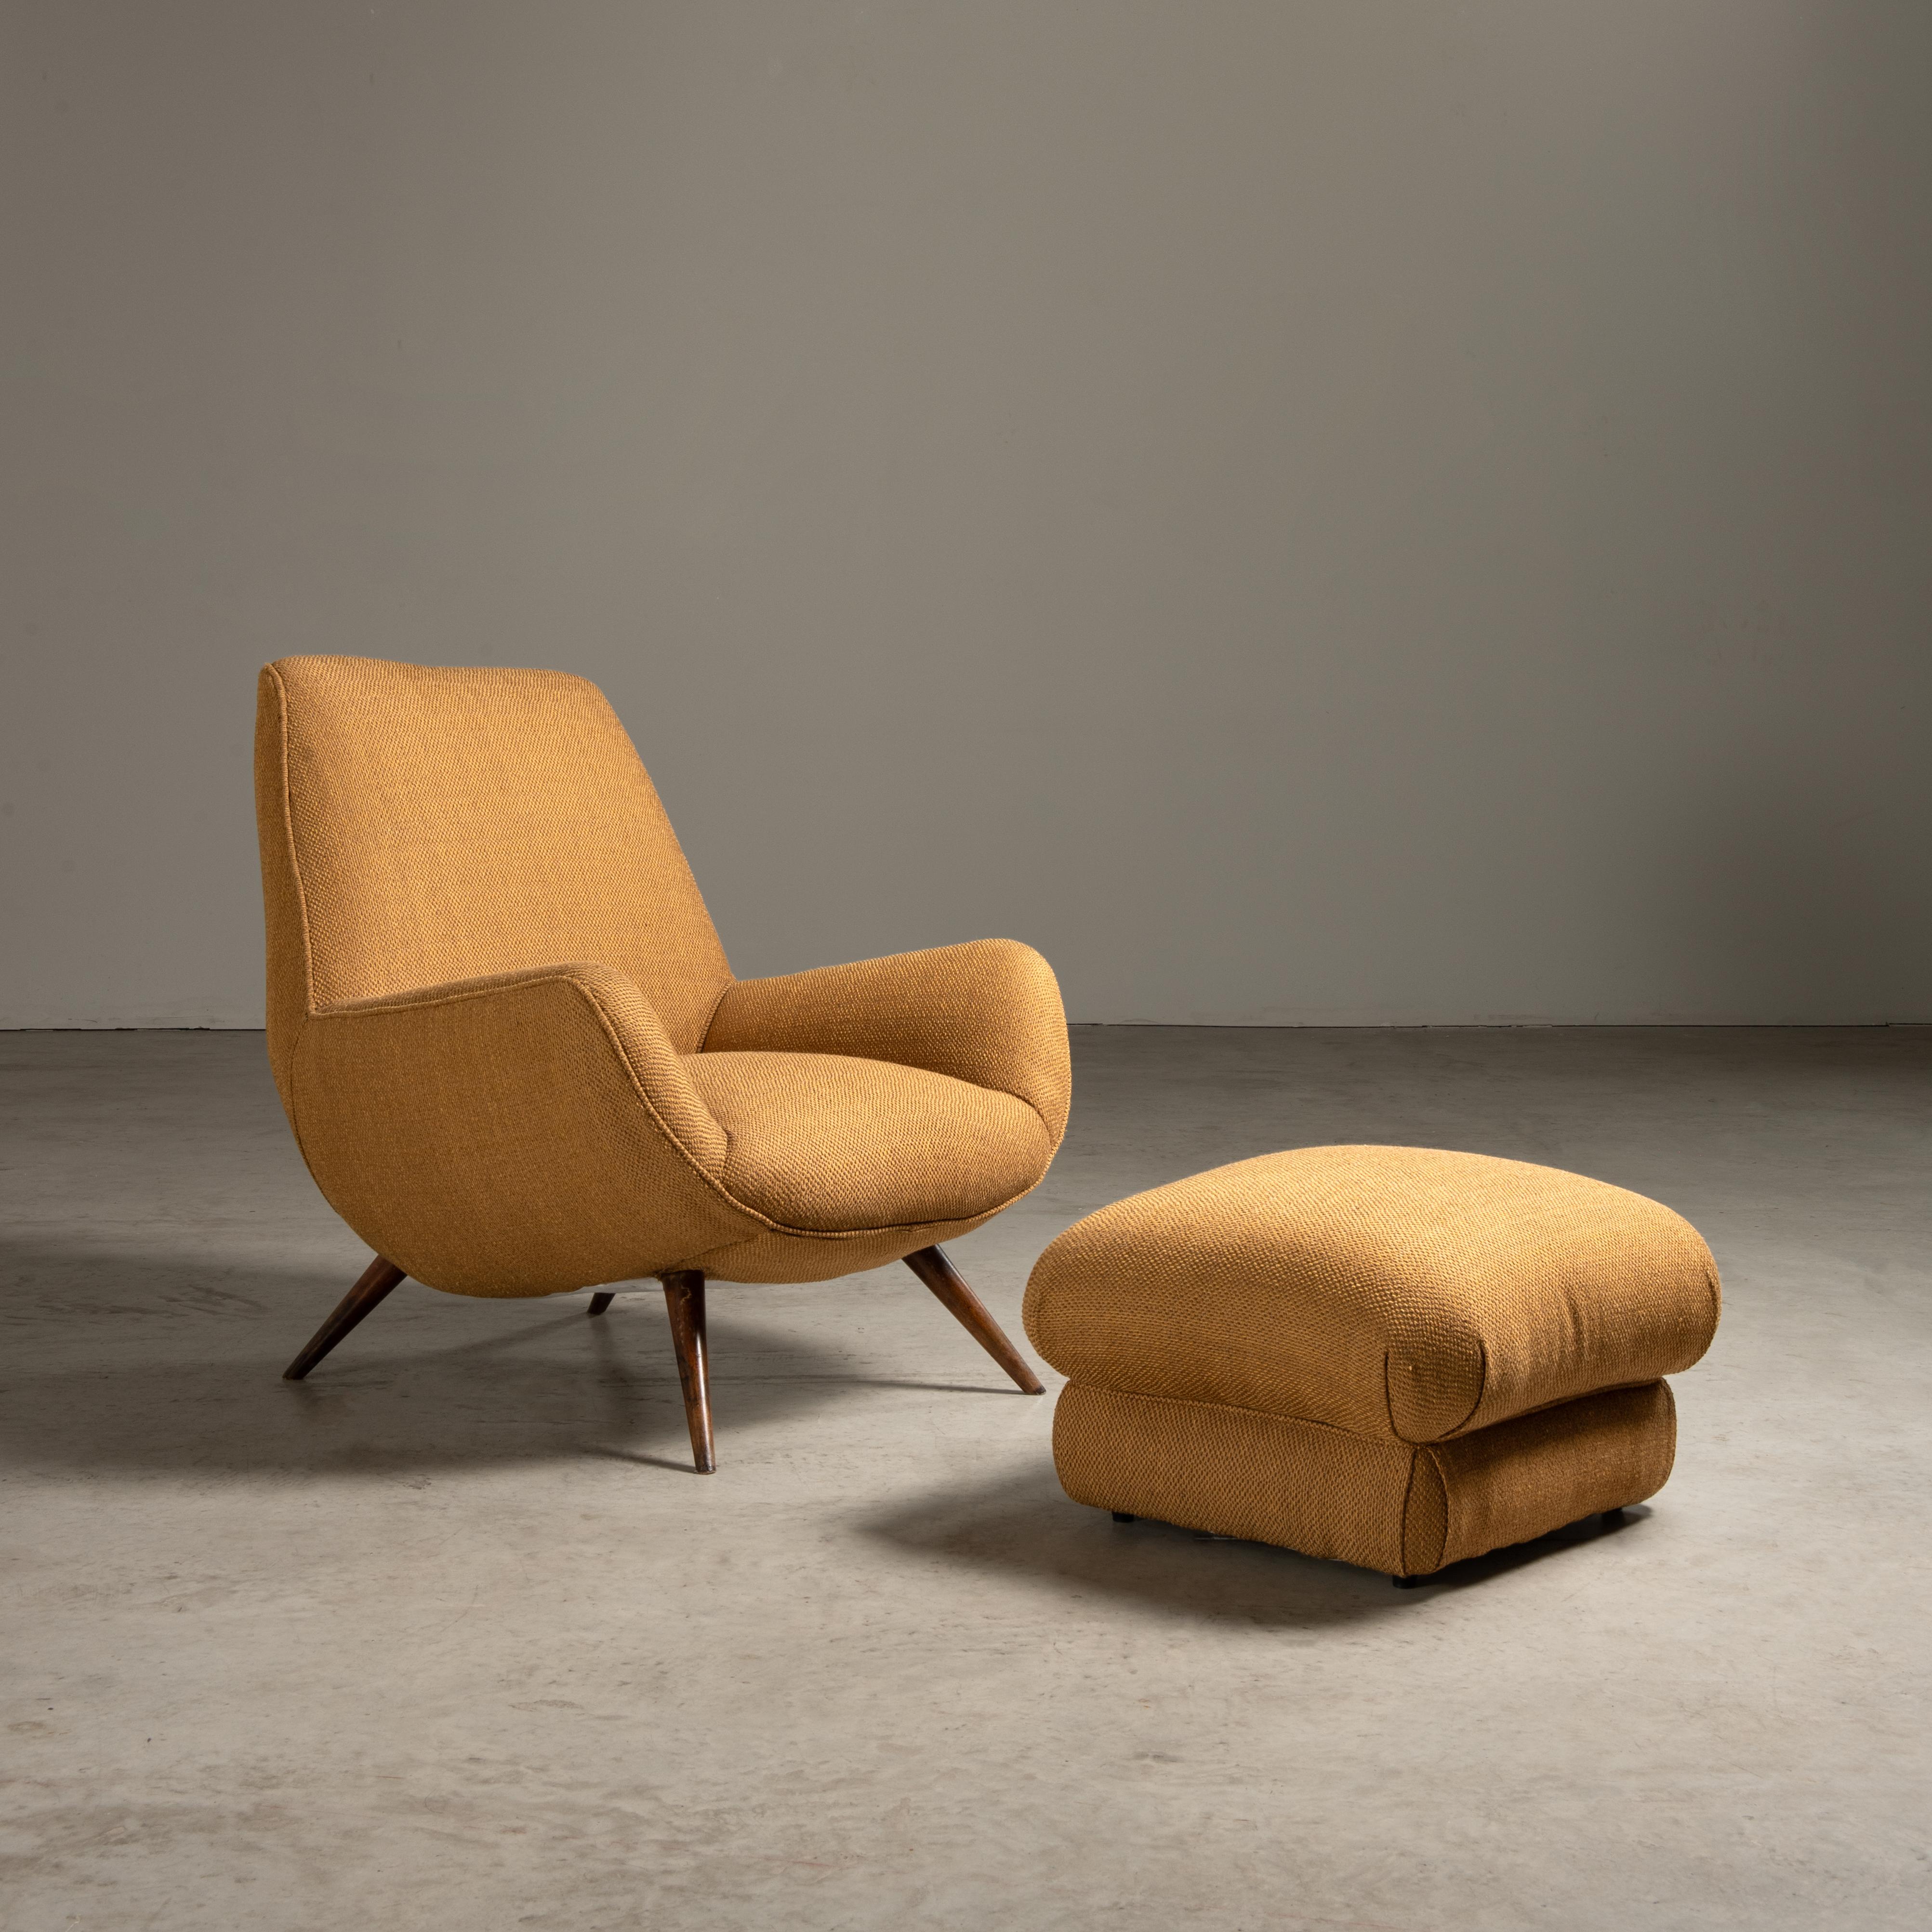 This Brazilian lounge chair with ottoman, an archetypical piece of 1950s design, is a remarkable example of the era's innovative approach to form, material, and comfort. Crafted in the golden age of mid-century modernism, it reflects a period where